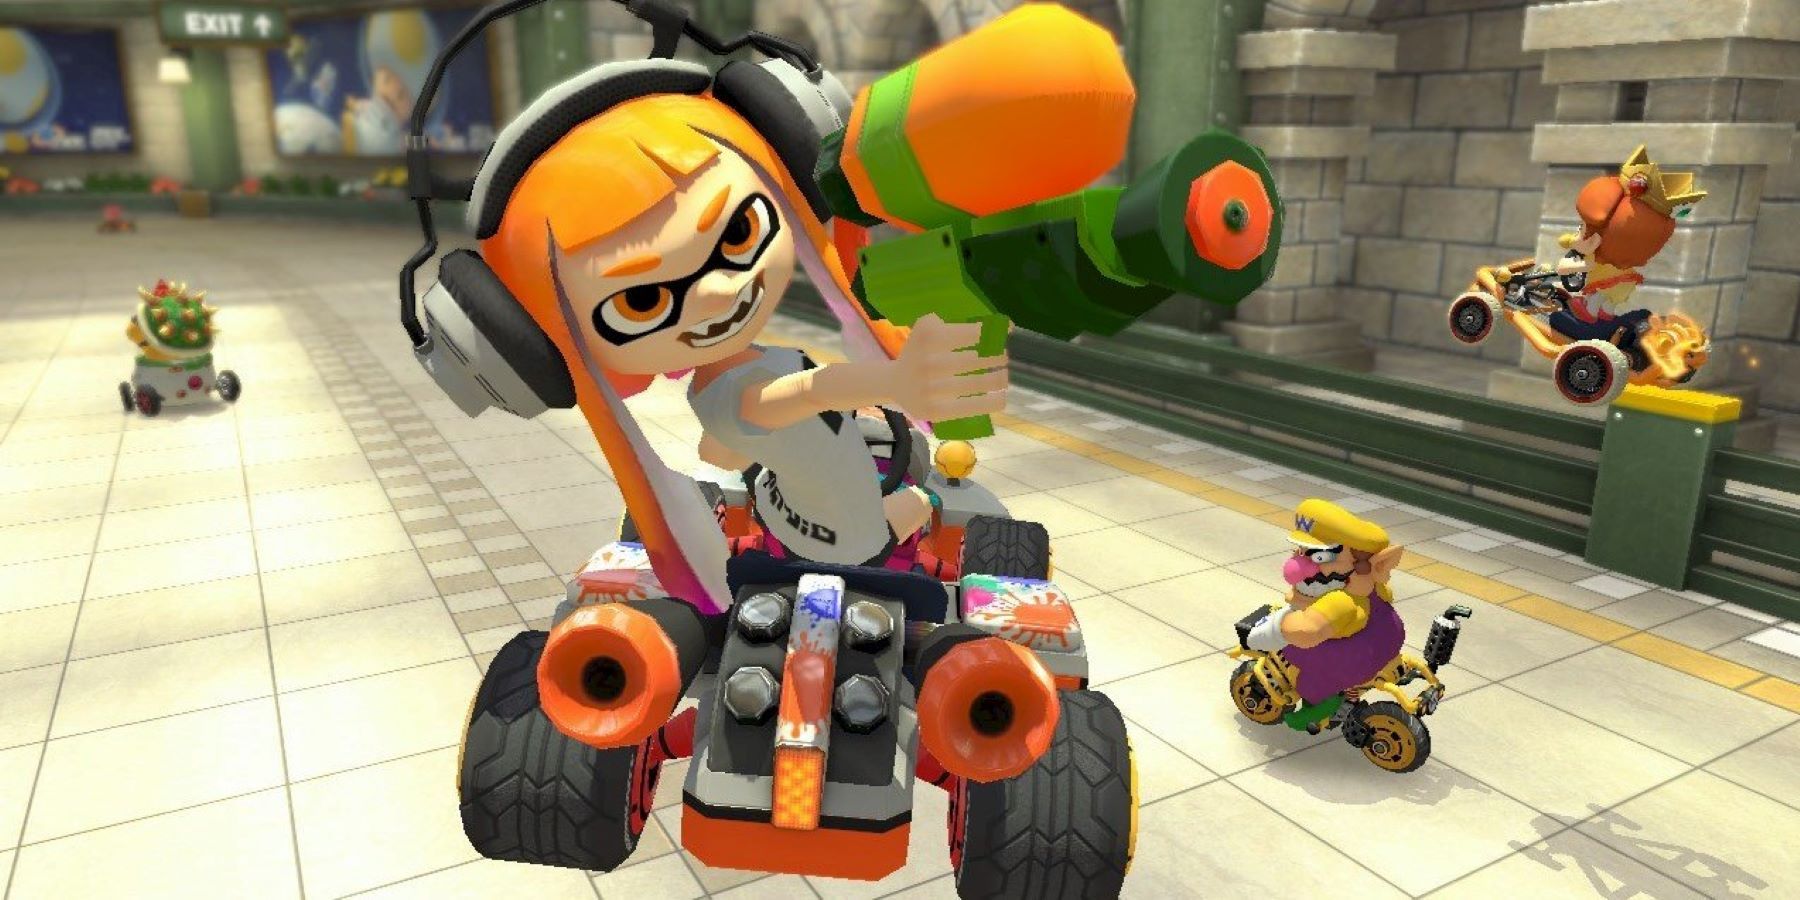 Inkling taunting with an ink blaster in Mario Kart 8 Deluxe